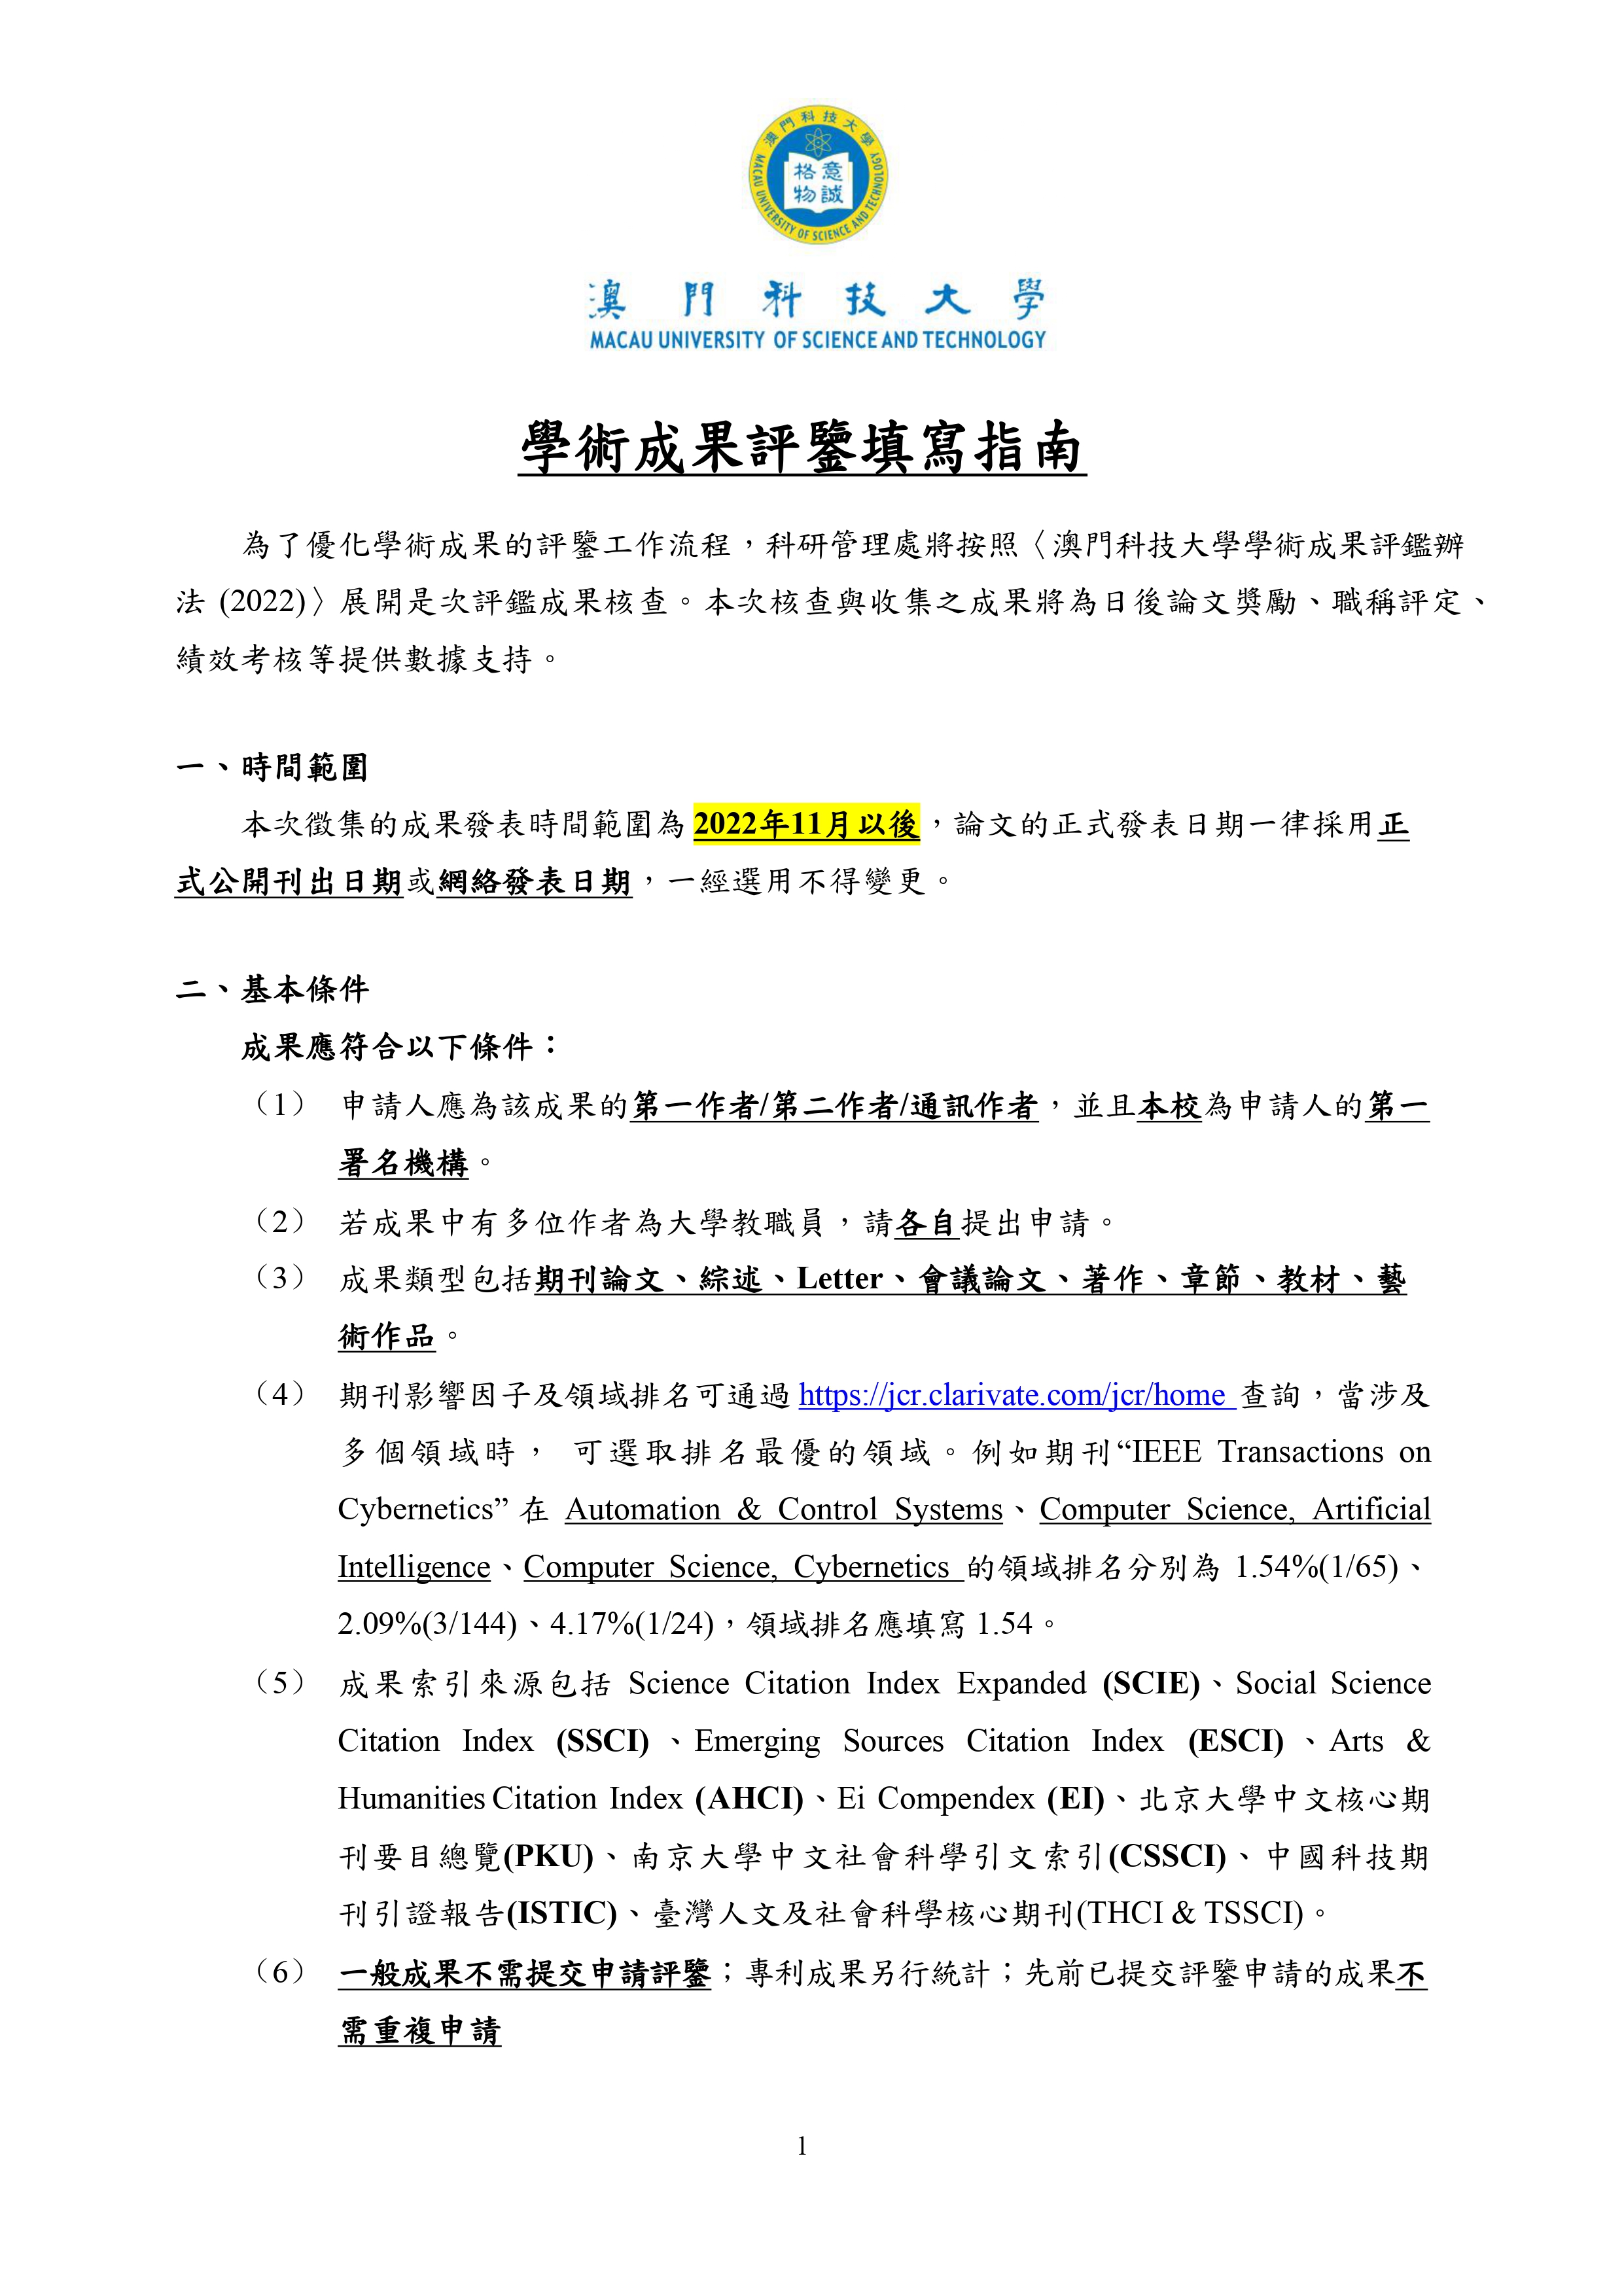 IMPORTANT 學術成果評鑒填寫指南The Evaluation Guidelines of Academic Achievements pages to jpg 0001